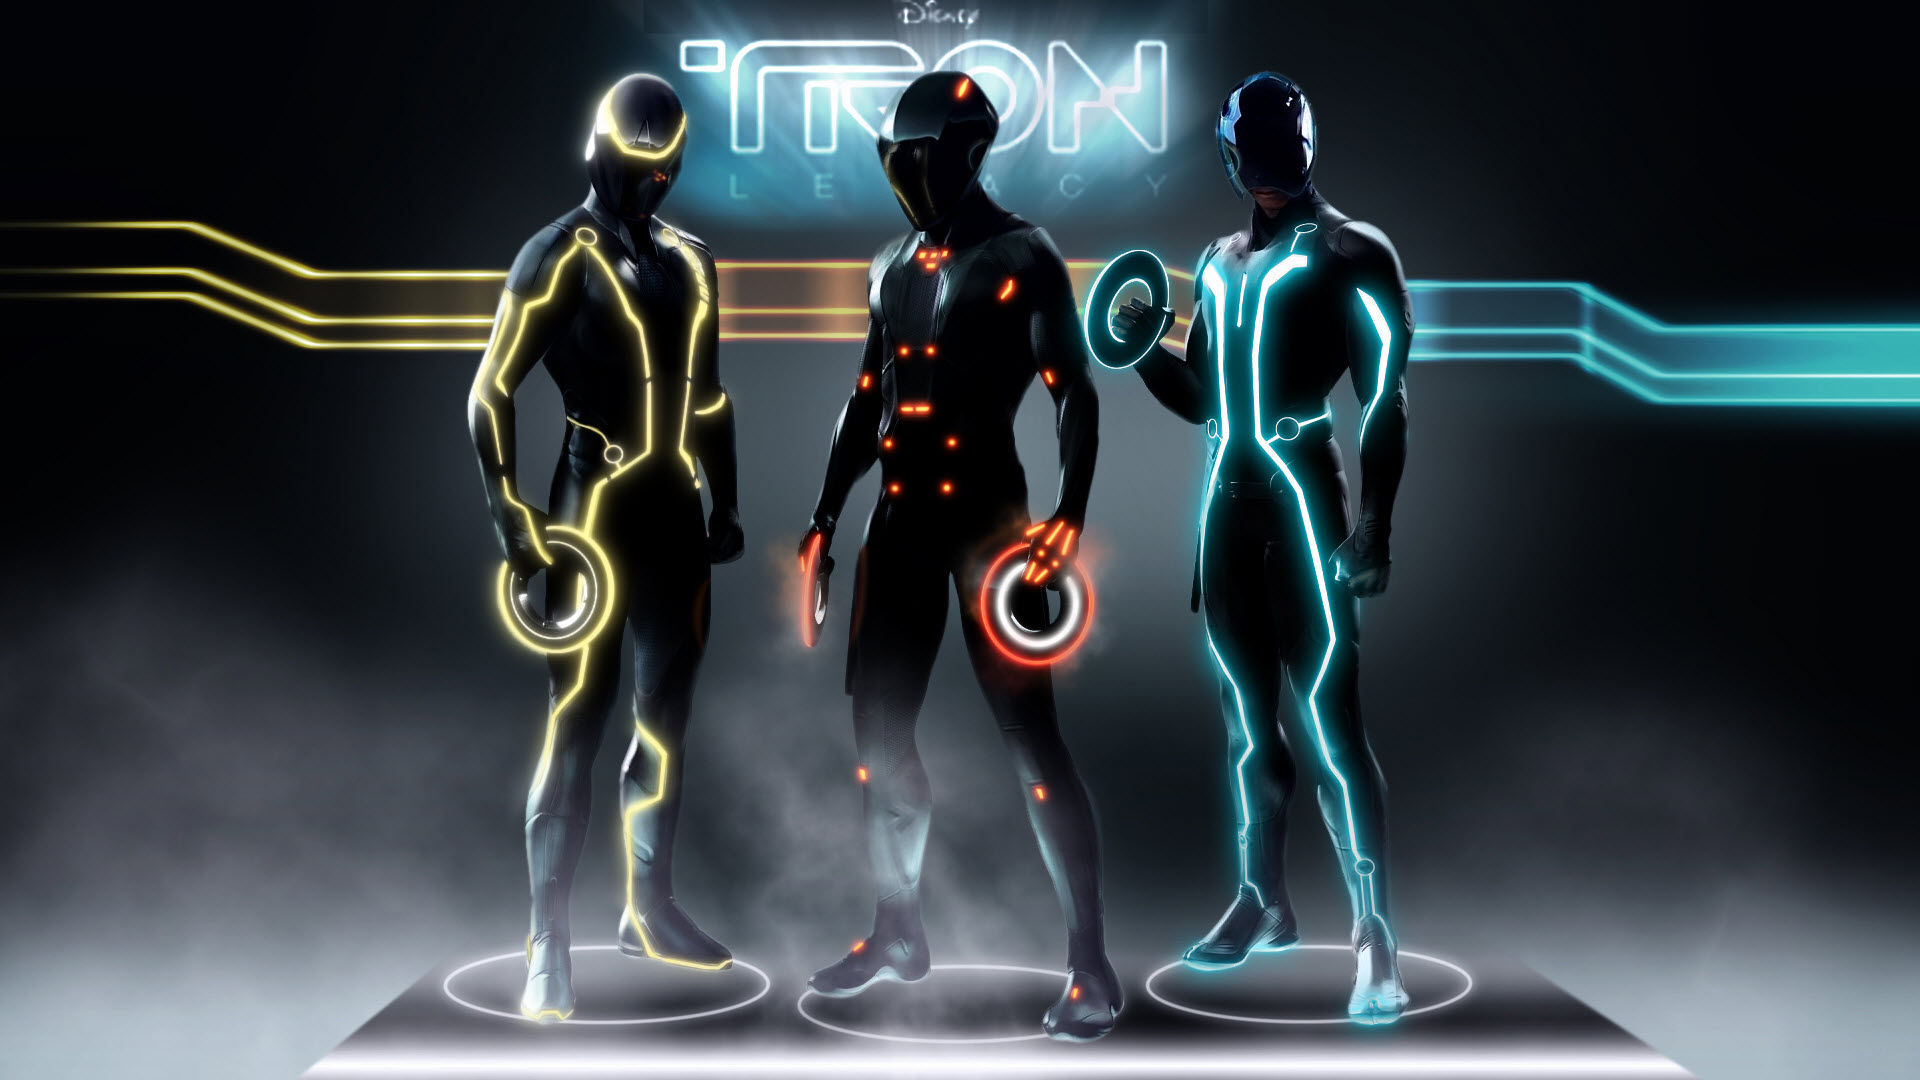 Tron Legacy Characters Wallpapers HD Wallpapers 1920x1080